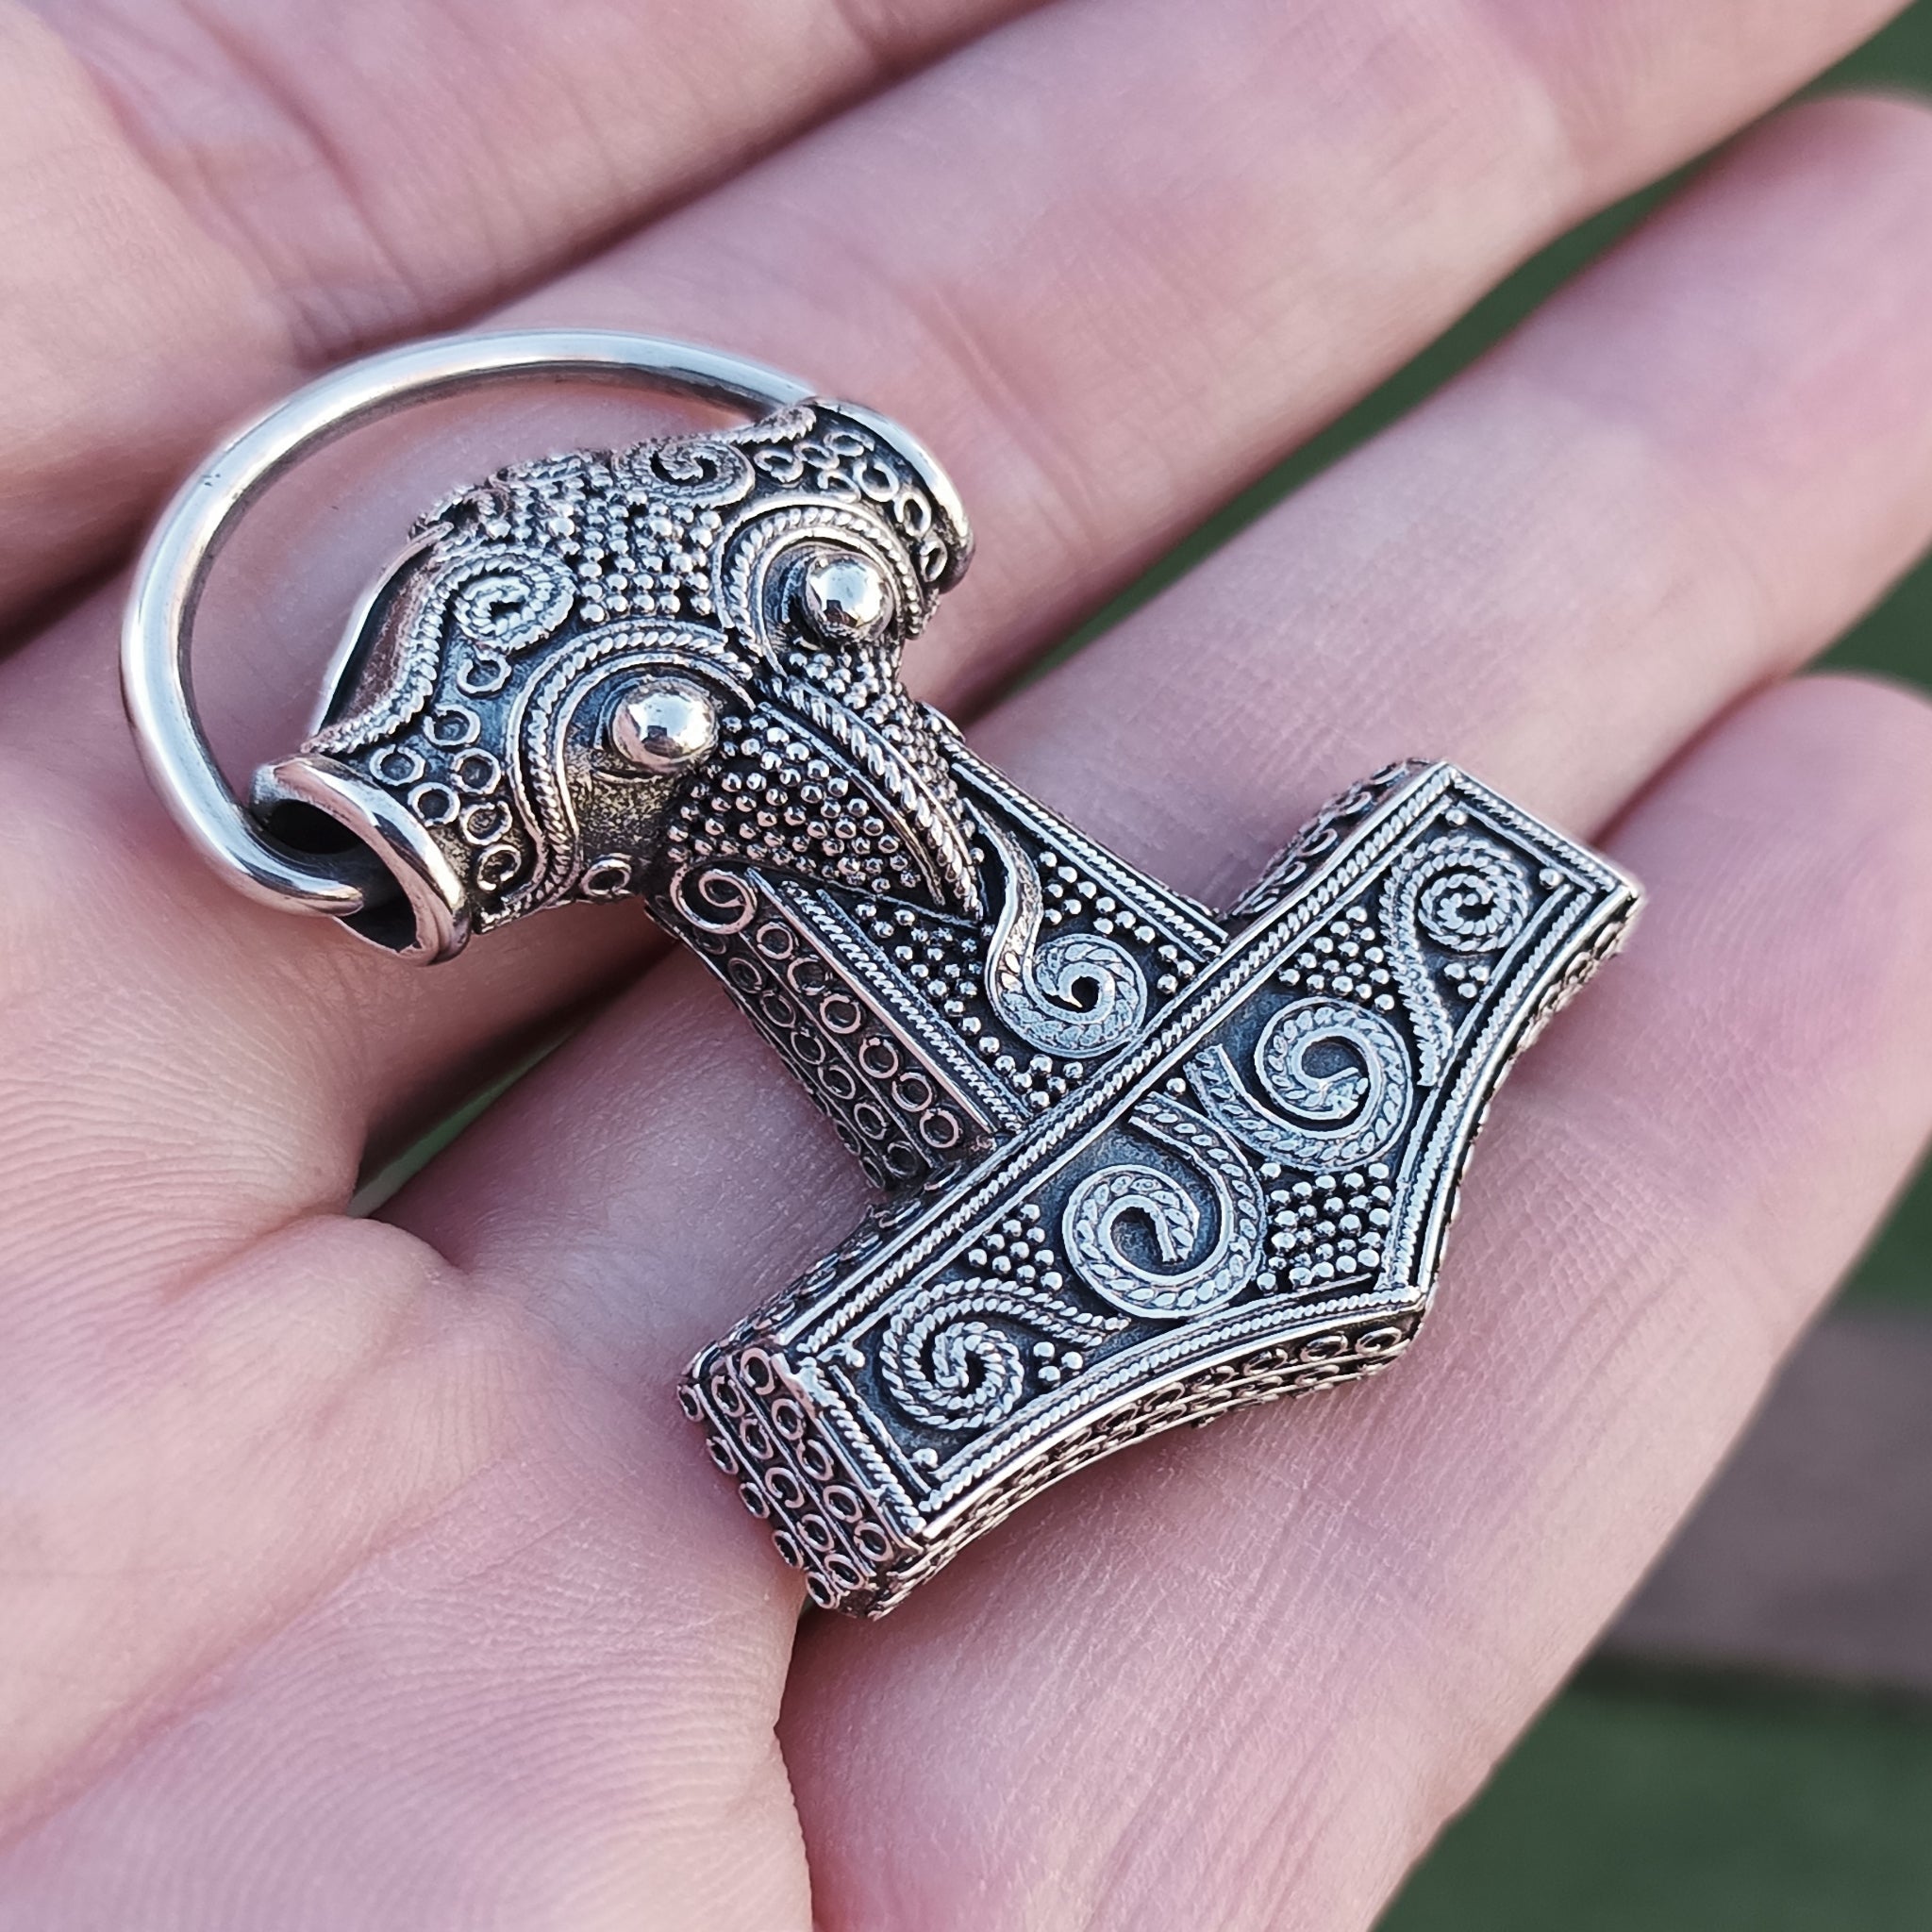 Silver Filigree Thors Hammer Pendant Replica from Kabara on Hand - Angle View